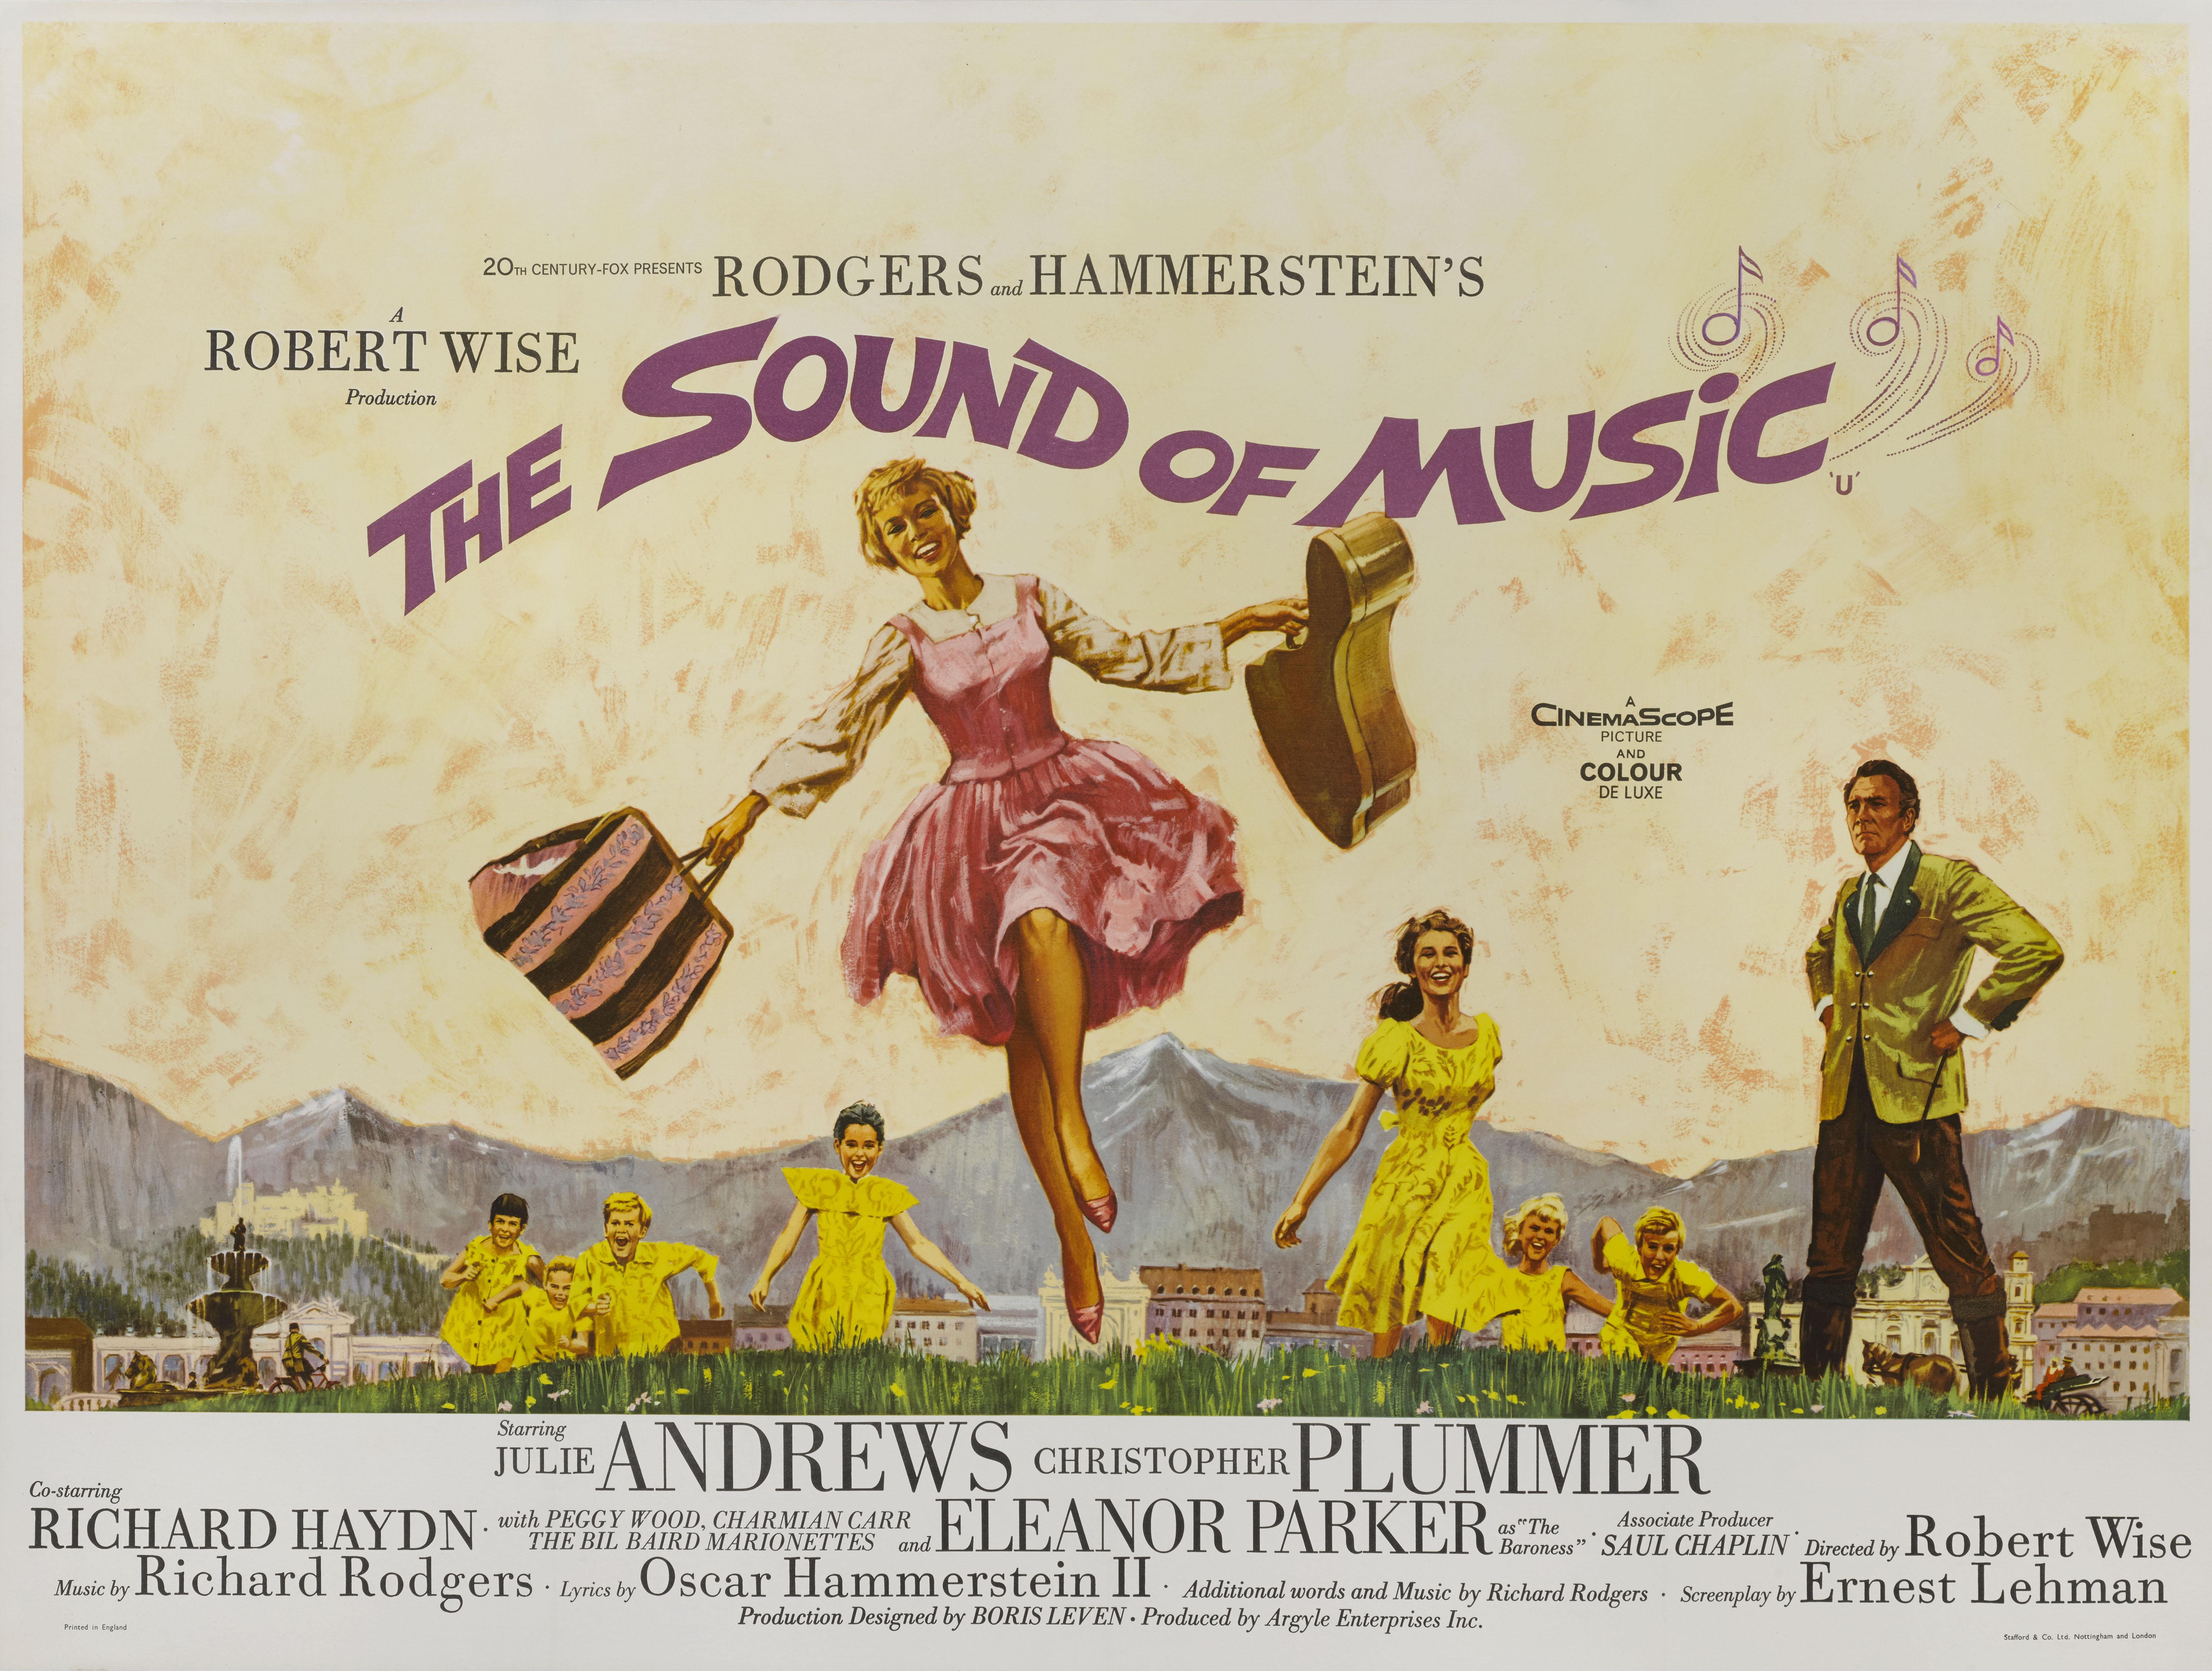 Original British film poster for the classic 1965 Musical starring Julie Andrews, Christopher Plummer. The film received five Academy Awards, including Best Picture and Best Director for Robert Wise.
This poster is conservation linen backed and it